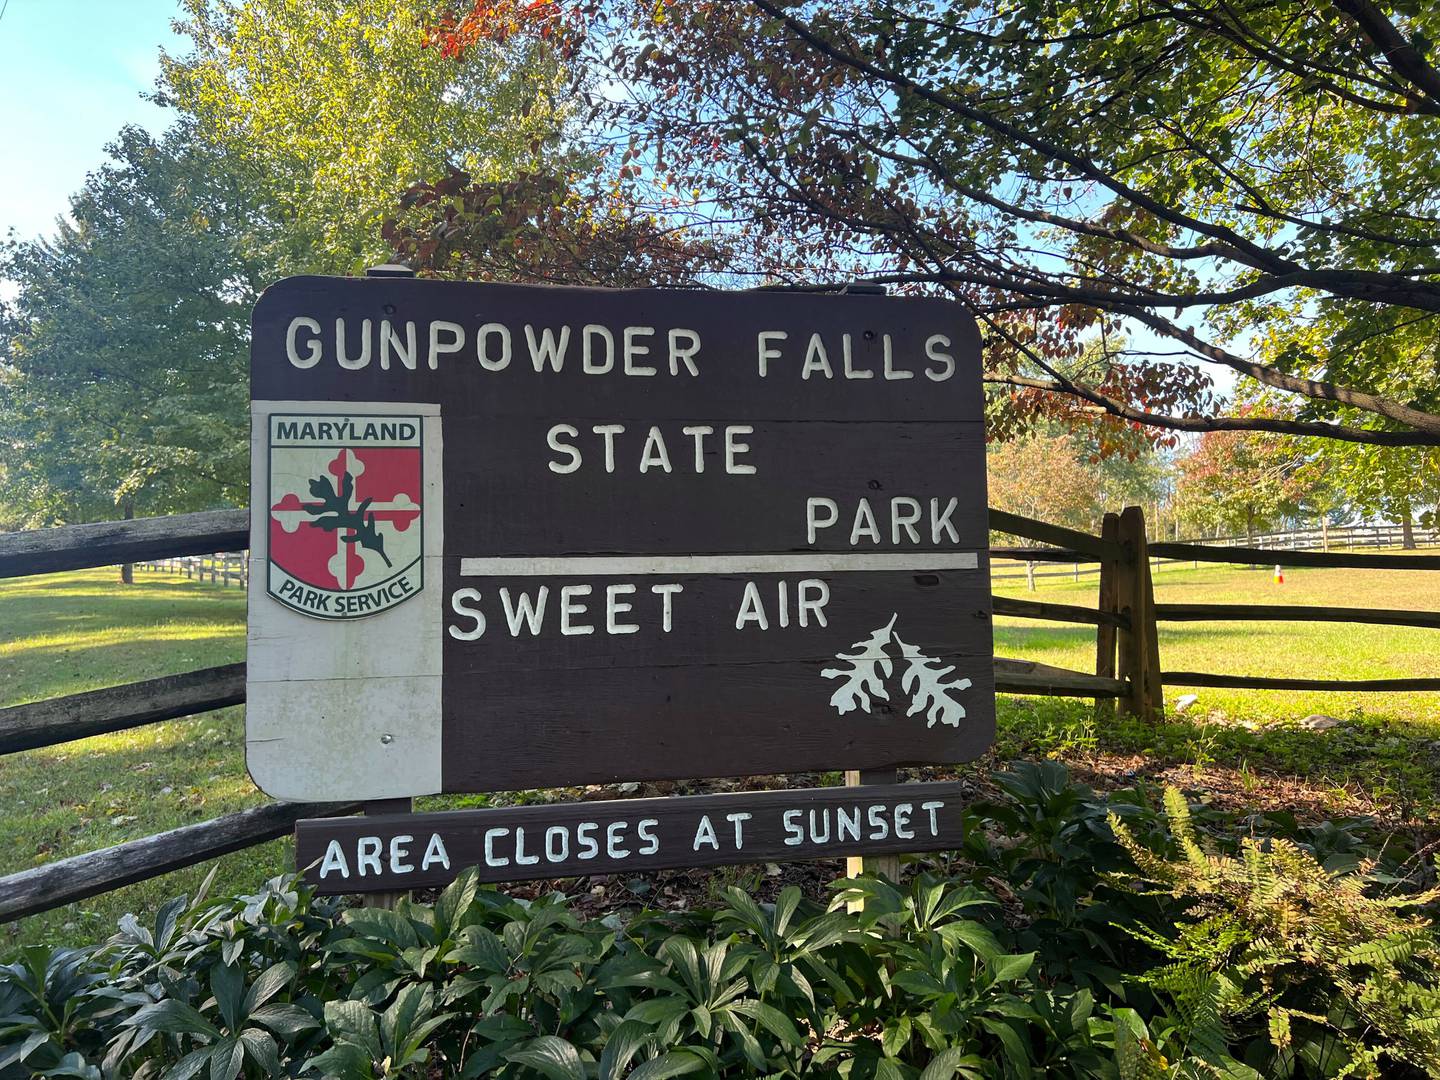 A sign at the entrance of Gunpowder Falls State Park Sweet Air Area.